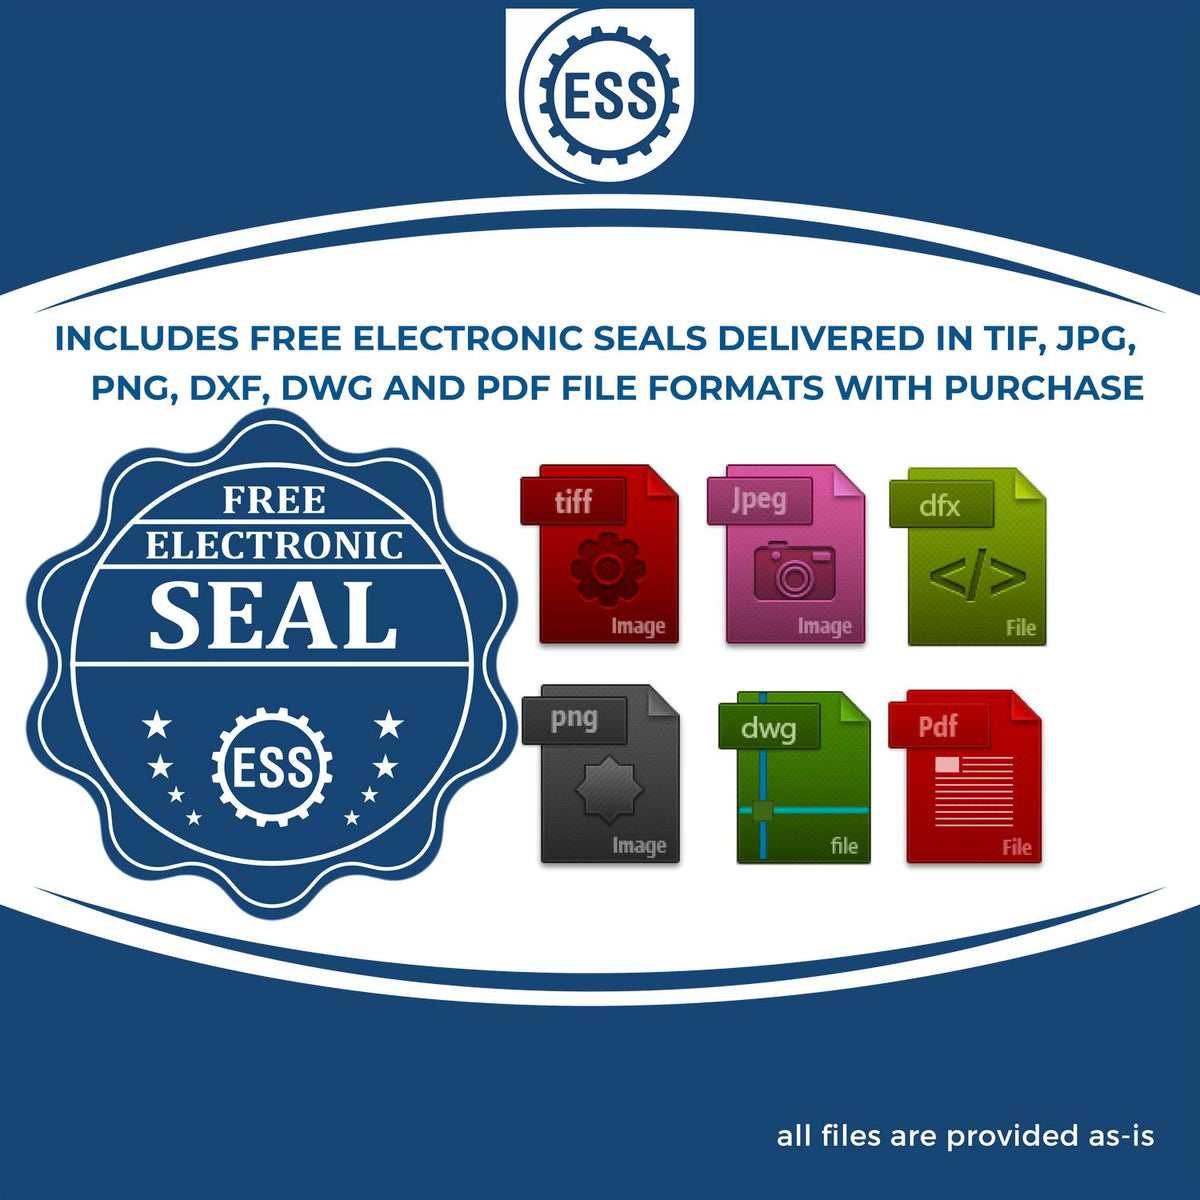 An infographic for the free electronic seal for the Slim Pre-Inked Connecticut Architect Seal Stamp illustrating the different file type icons such as DXF, DWG, TIF, JPG and PNG.